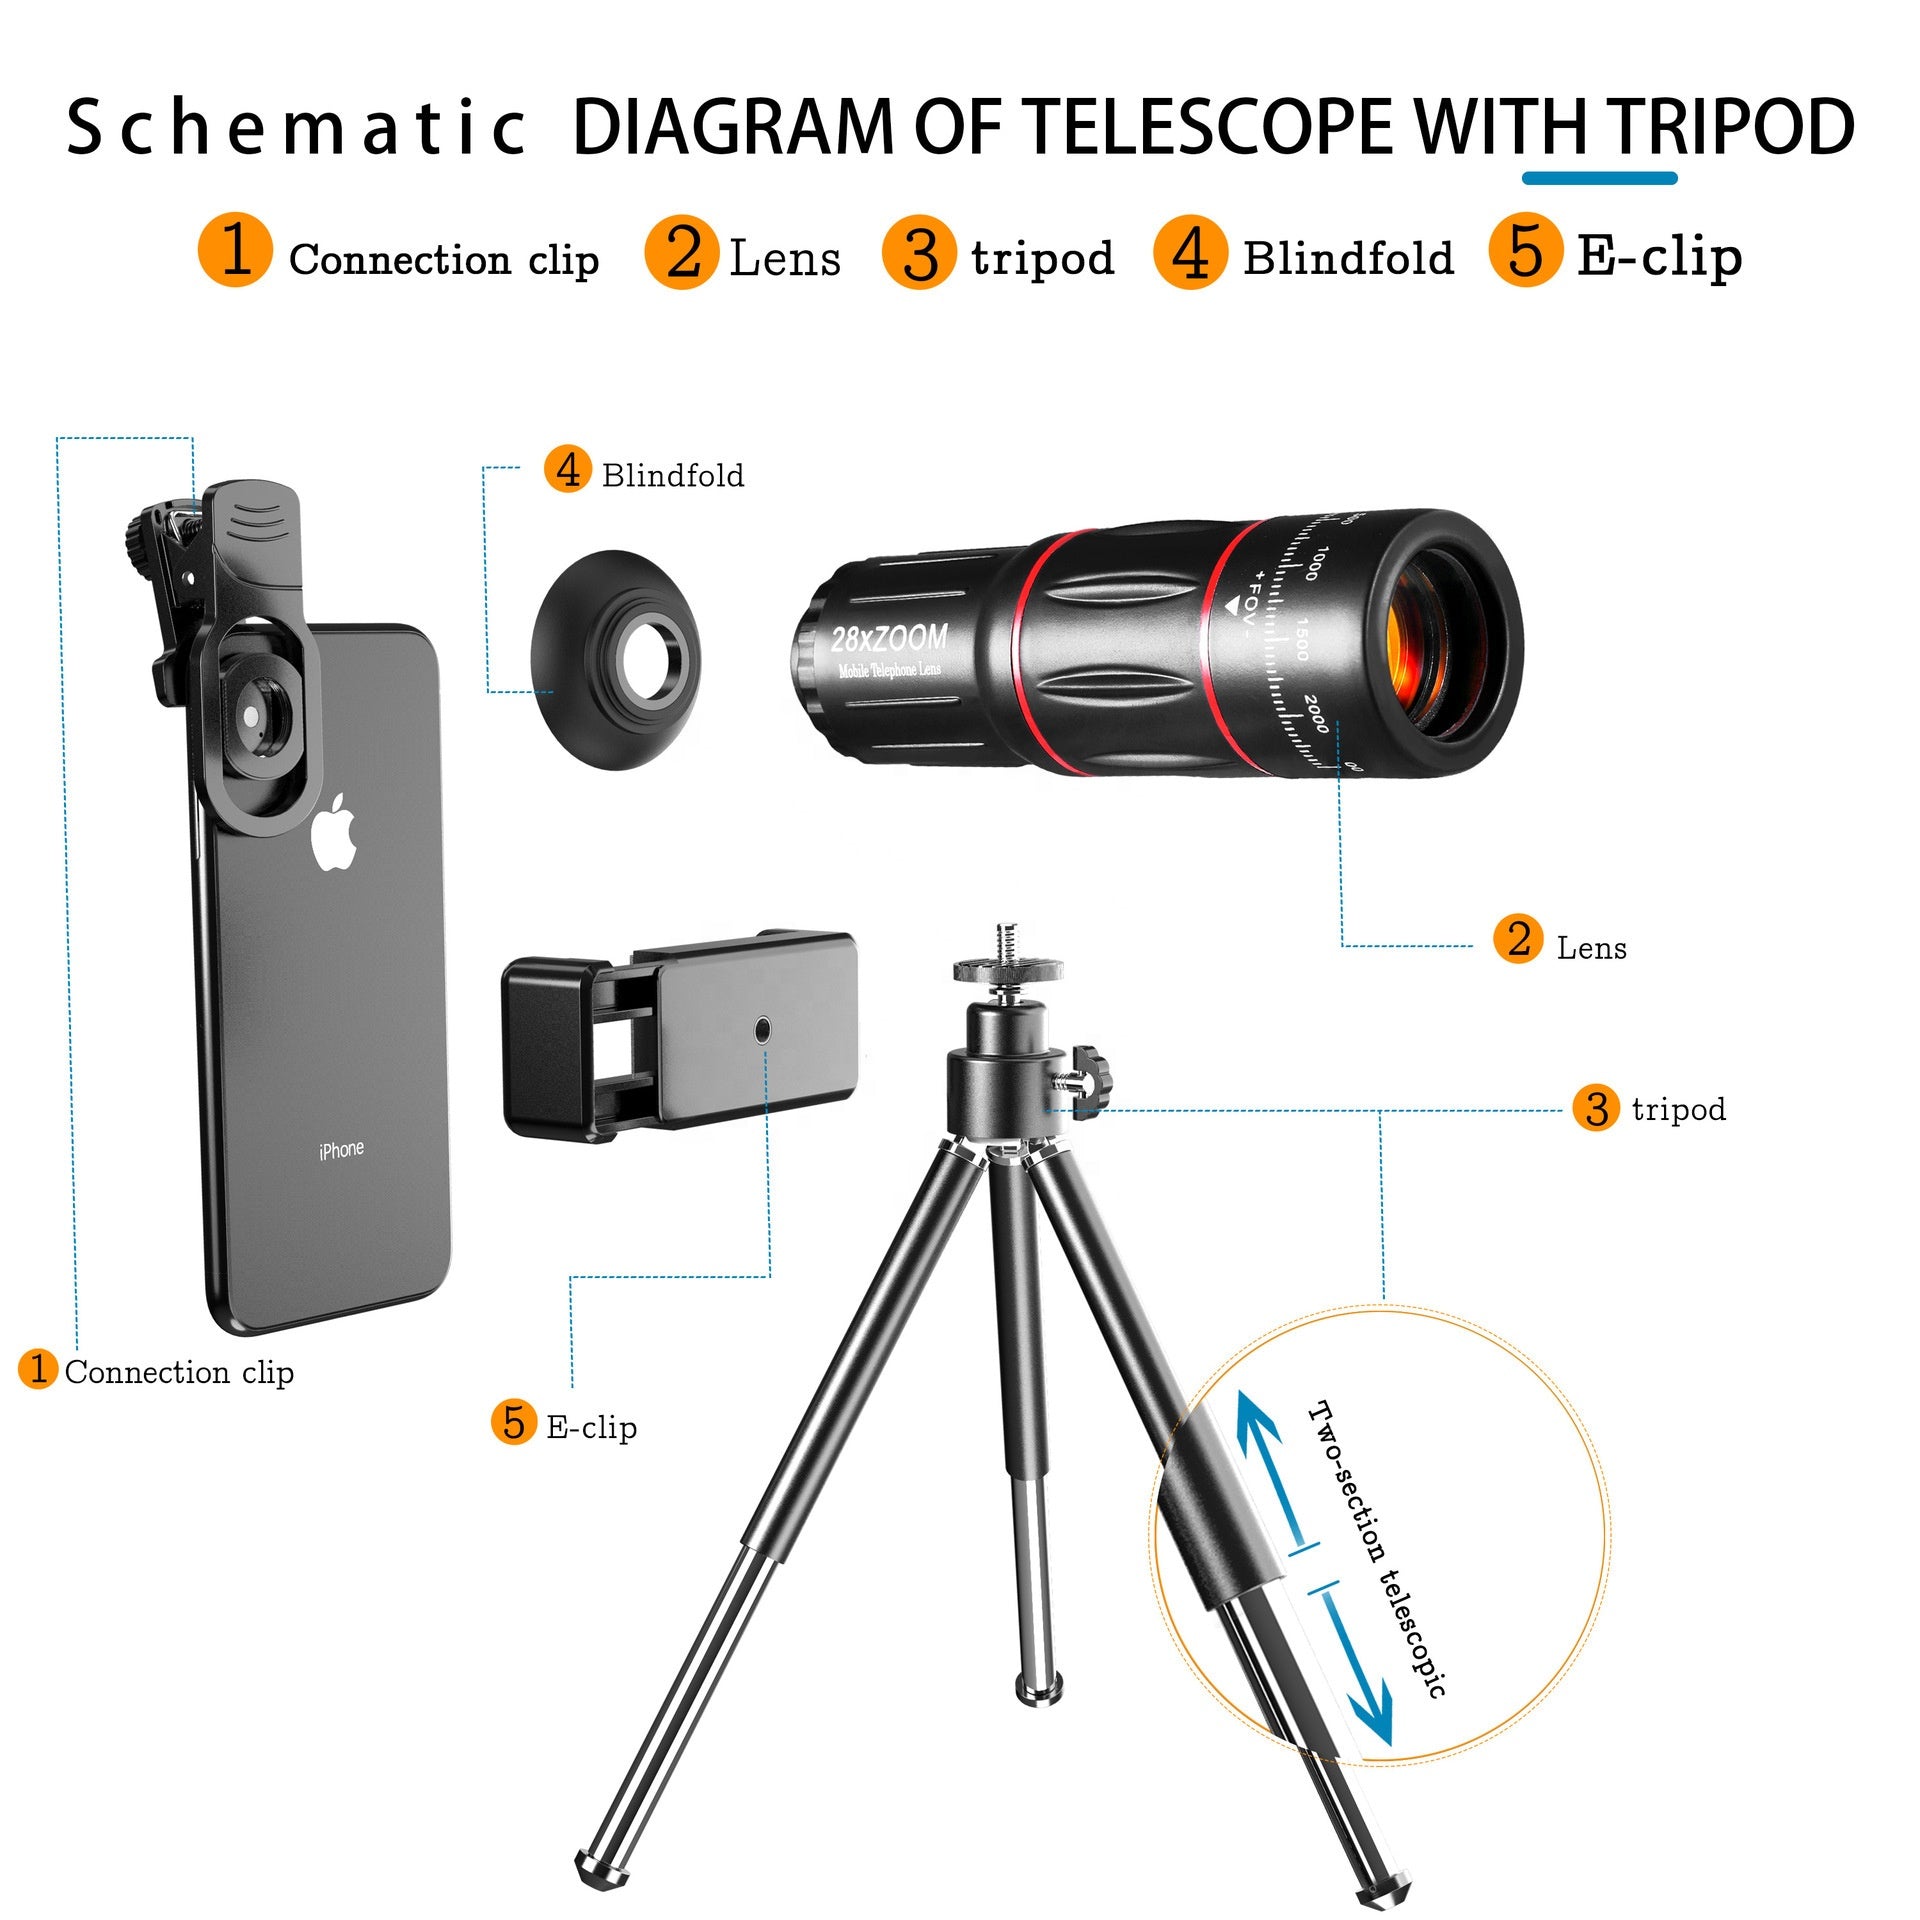 Newest Mobile Phone Photography Gadget Smart Phone Camera Accessories HD Telephoto Fish Eye 0.63X Wide Macro Lens Kit for iPhone | Electrr Inc